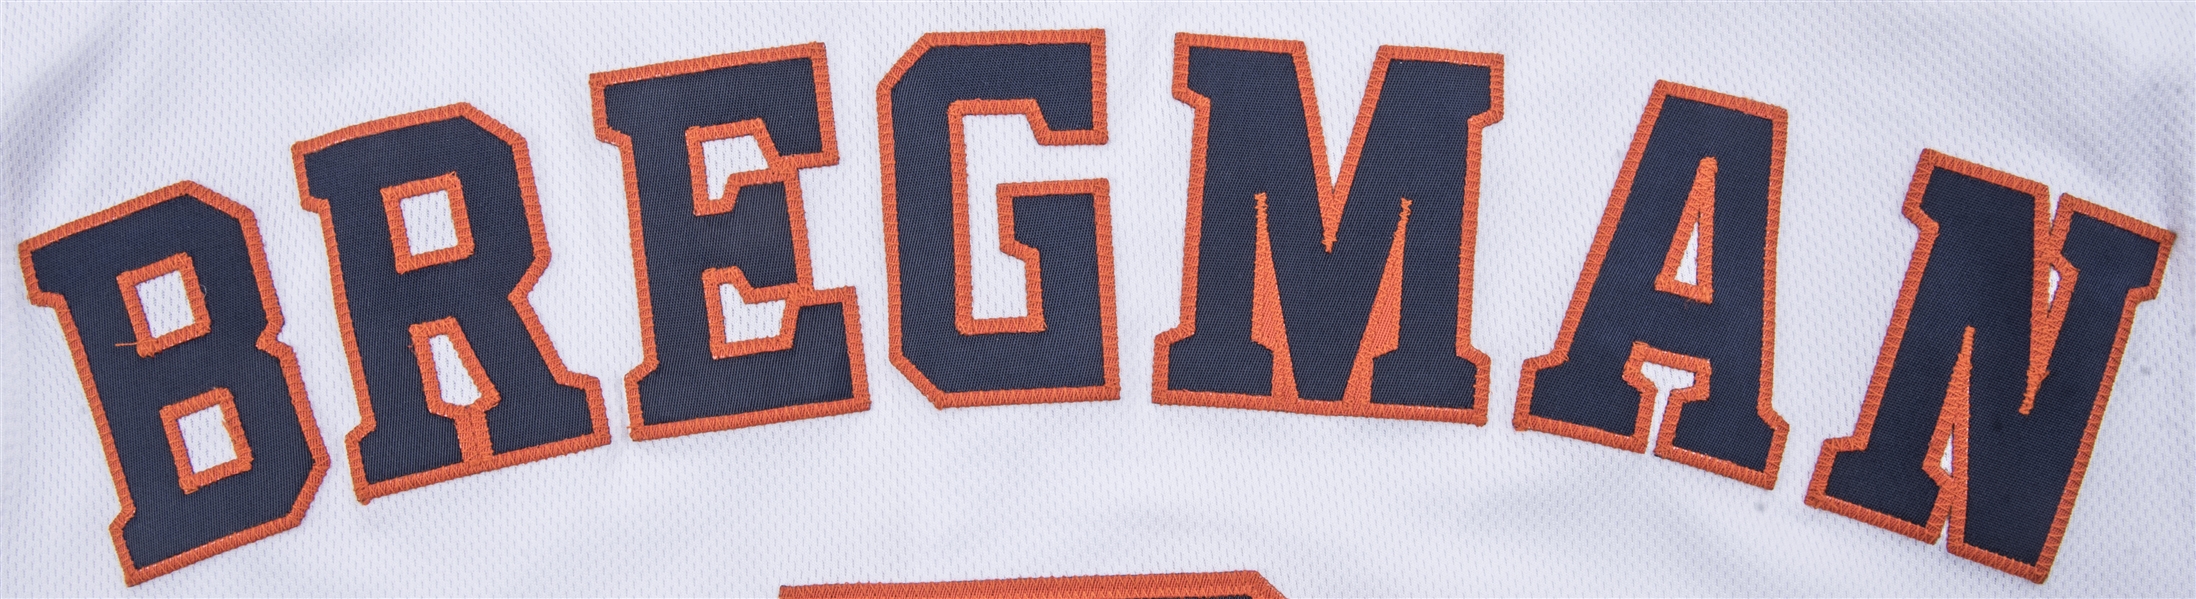 Alex Bregman 2022 Game-Used Jersey- 4 for 6, 2 HR, 6 RBI. Worn During  Career Double #200.